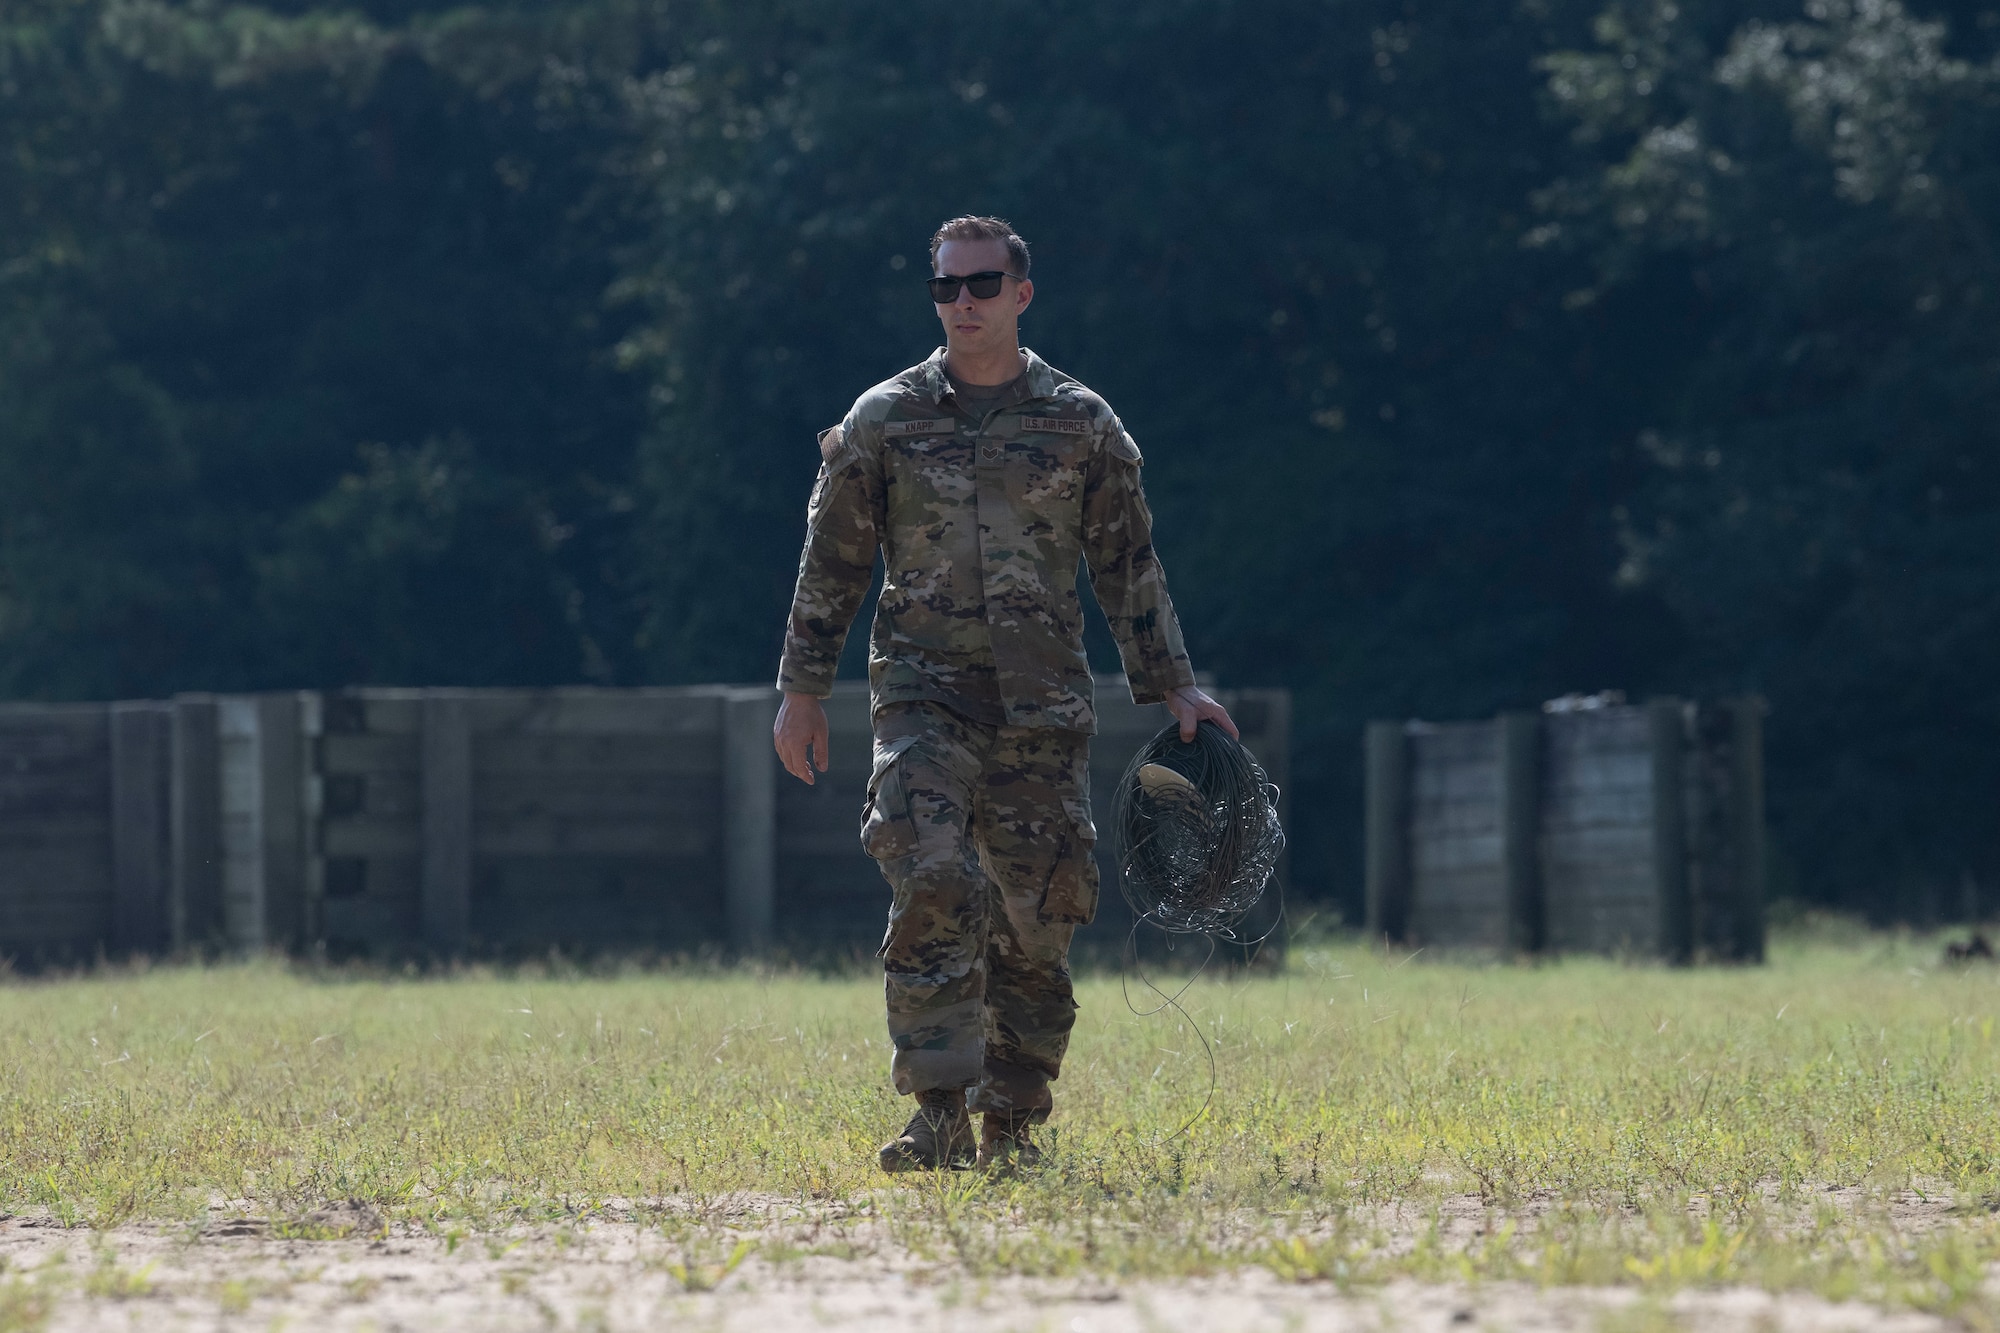 Staff Sgt. David Knapp, Air Force Reserve Command Explosive Ordnance Disposal cross-trainee, carries a used detonation cable after a detonation at Seymour Johnson Air Force Base, North Carolina, Aug. 4, 2022. Knapp is conducting on-the-job training with the 4th Civil Engineer Squadron’s EOD flight prior to attending EOD technical training. (U.S. Air Force photo by Senior Airman Kevin Holloway)